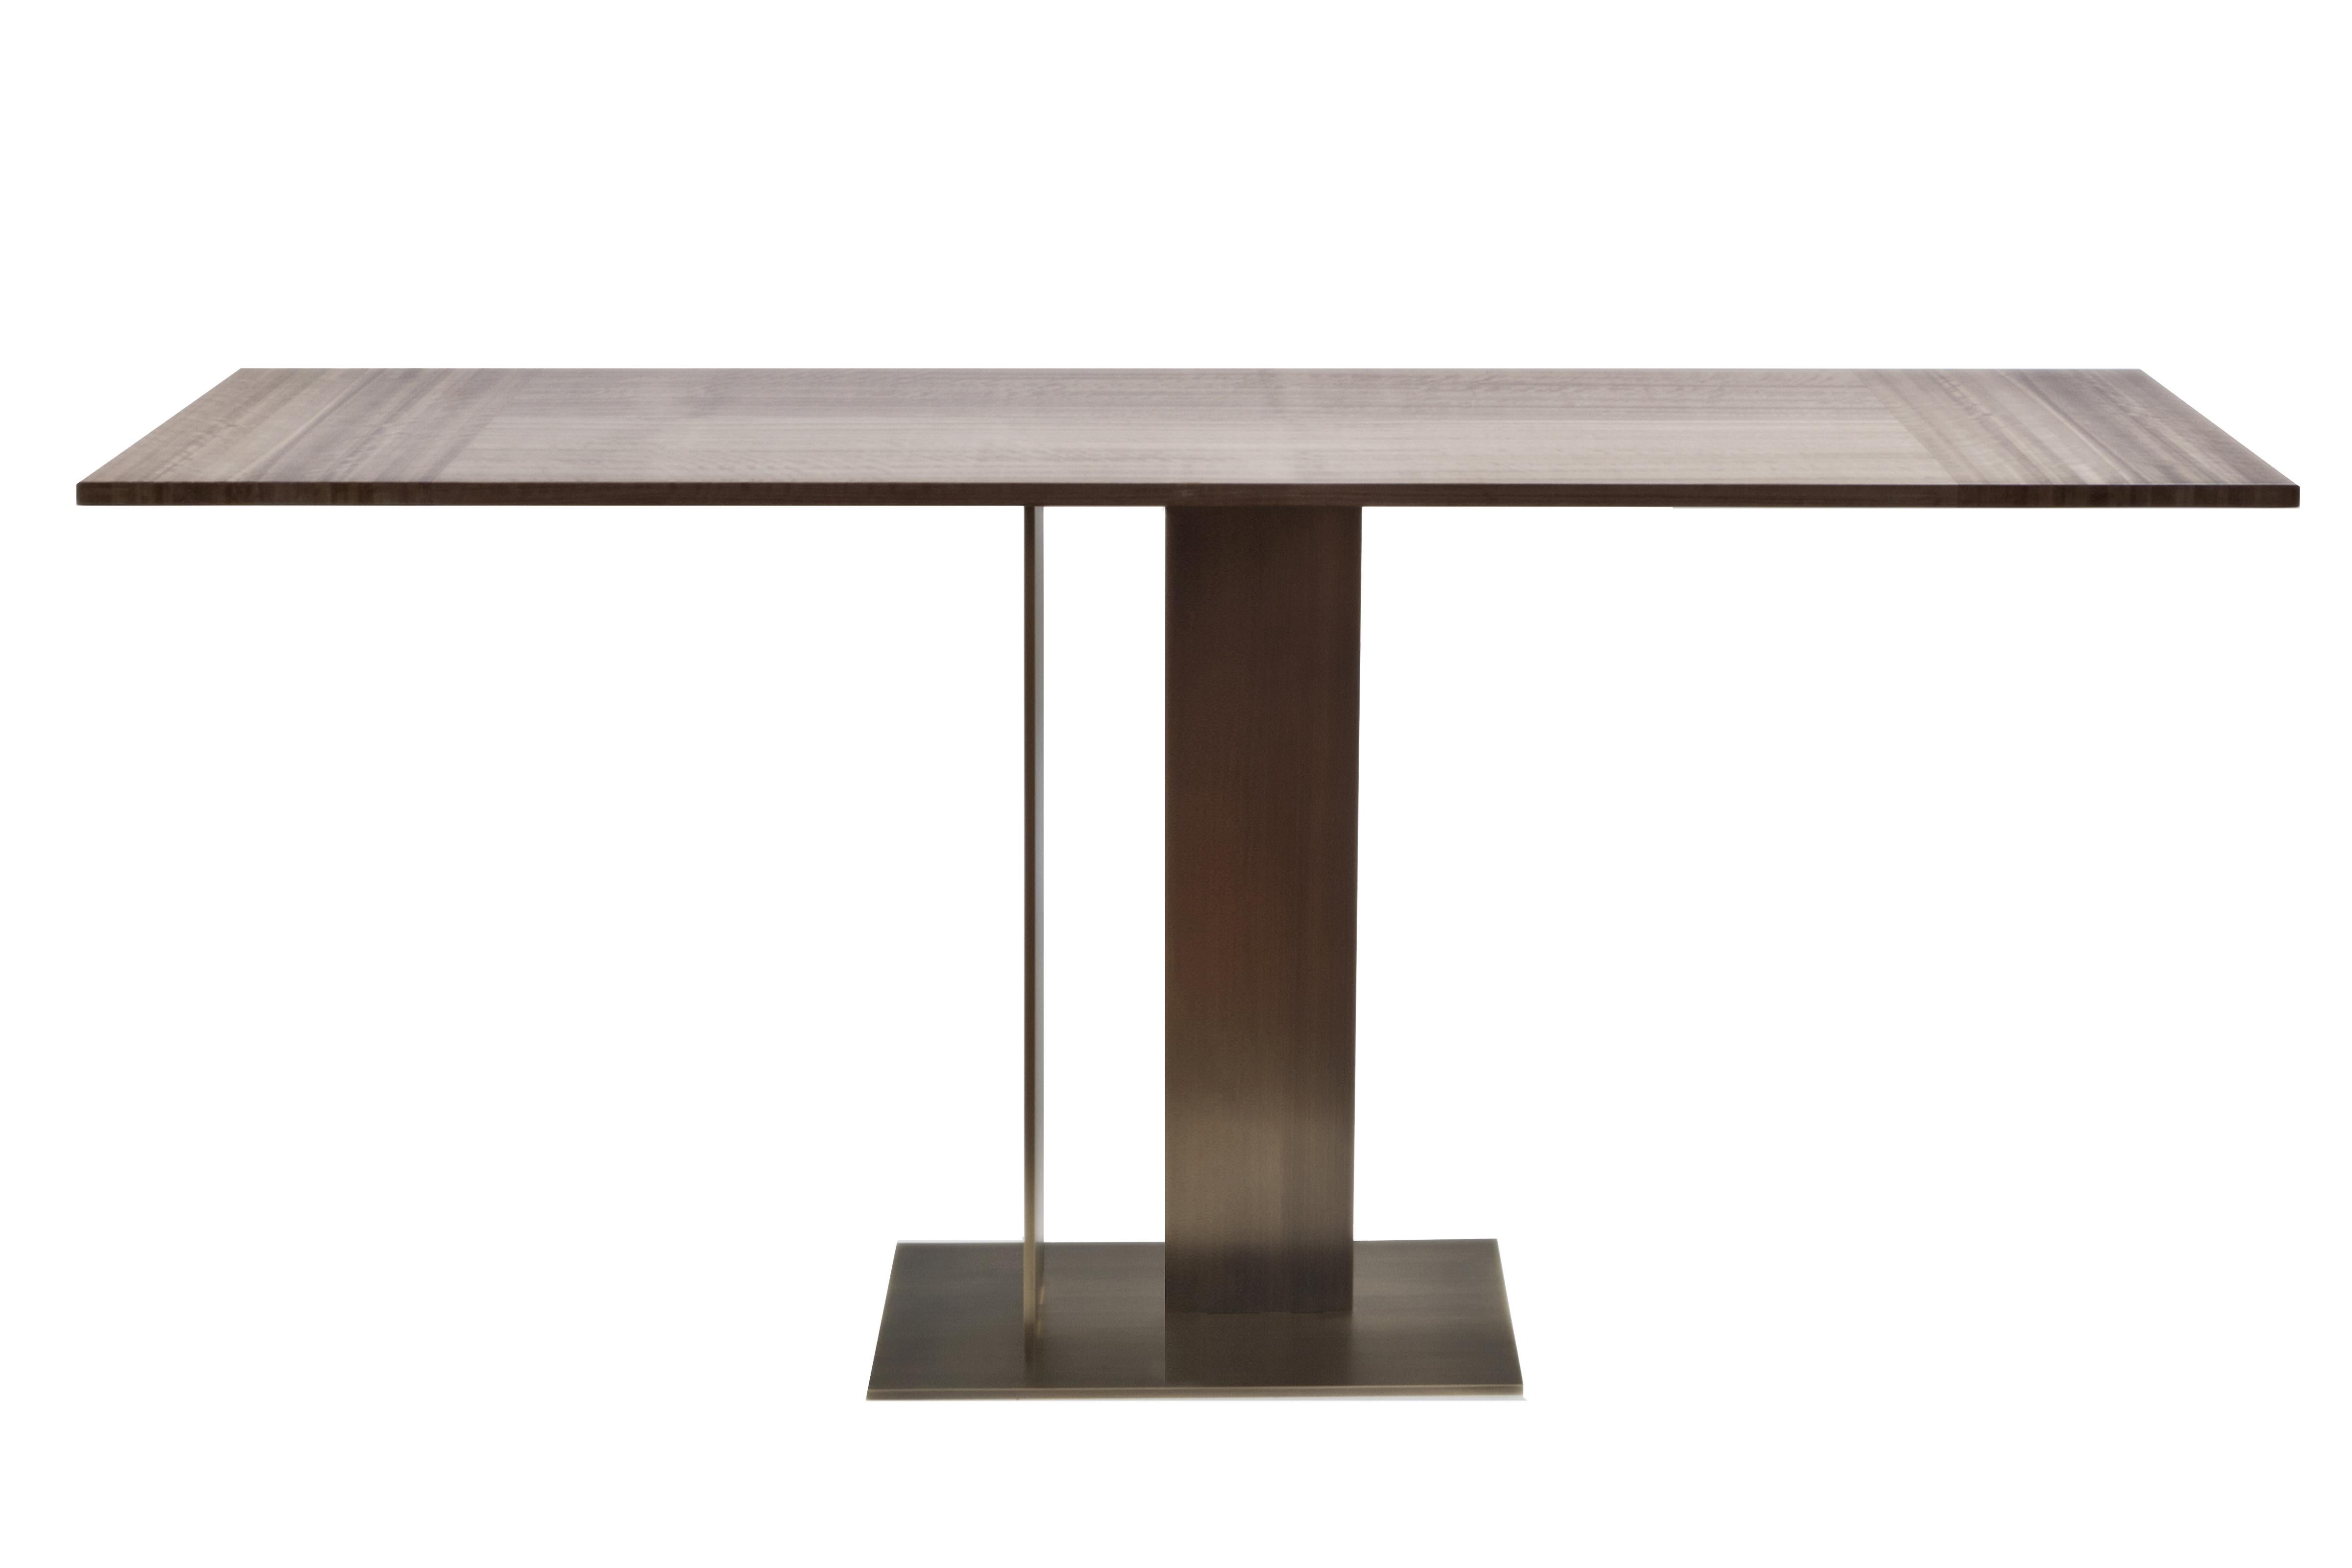 A console inspired by the Modern Movement - in particular by the formal rigour of Mies van der Rohe and the free compositions of Gerrit T. Rietveld - in the layout of the right-angled thin metal blades which make up the base.

The top,